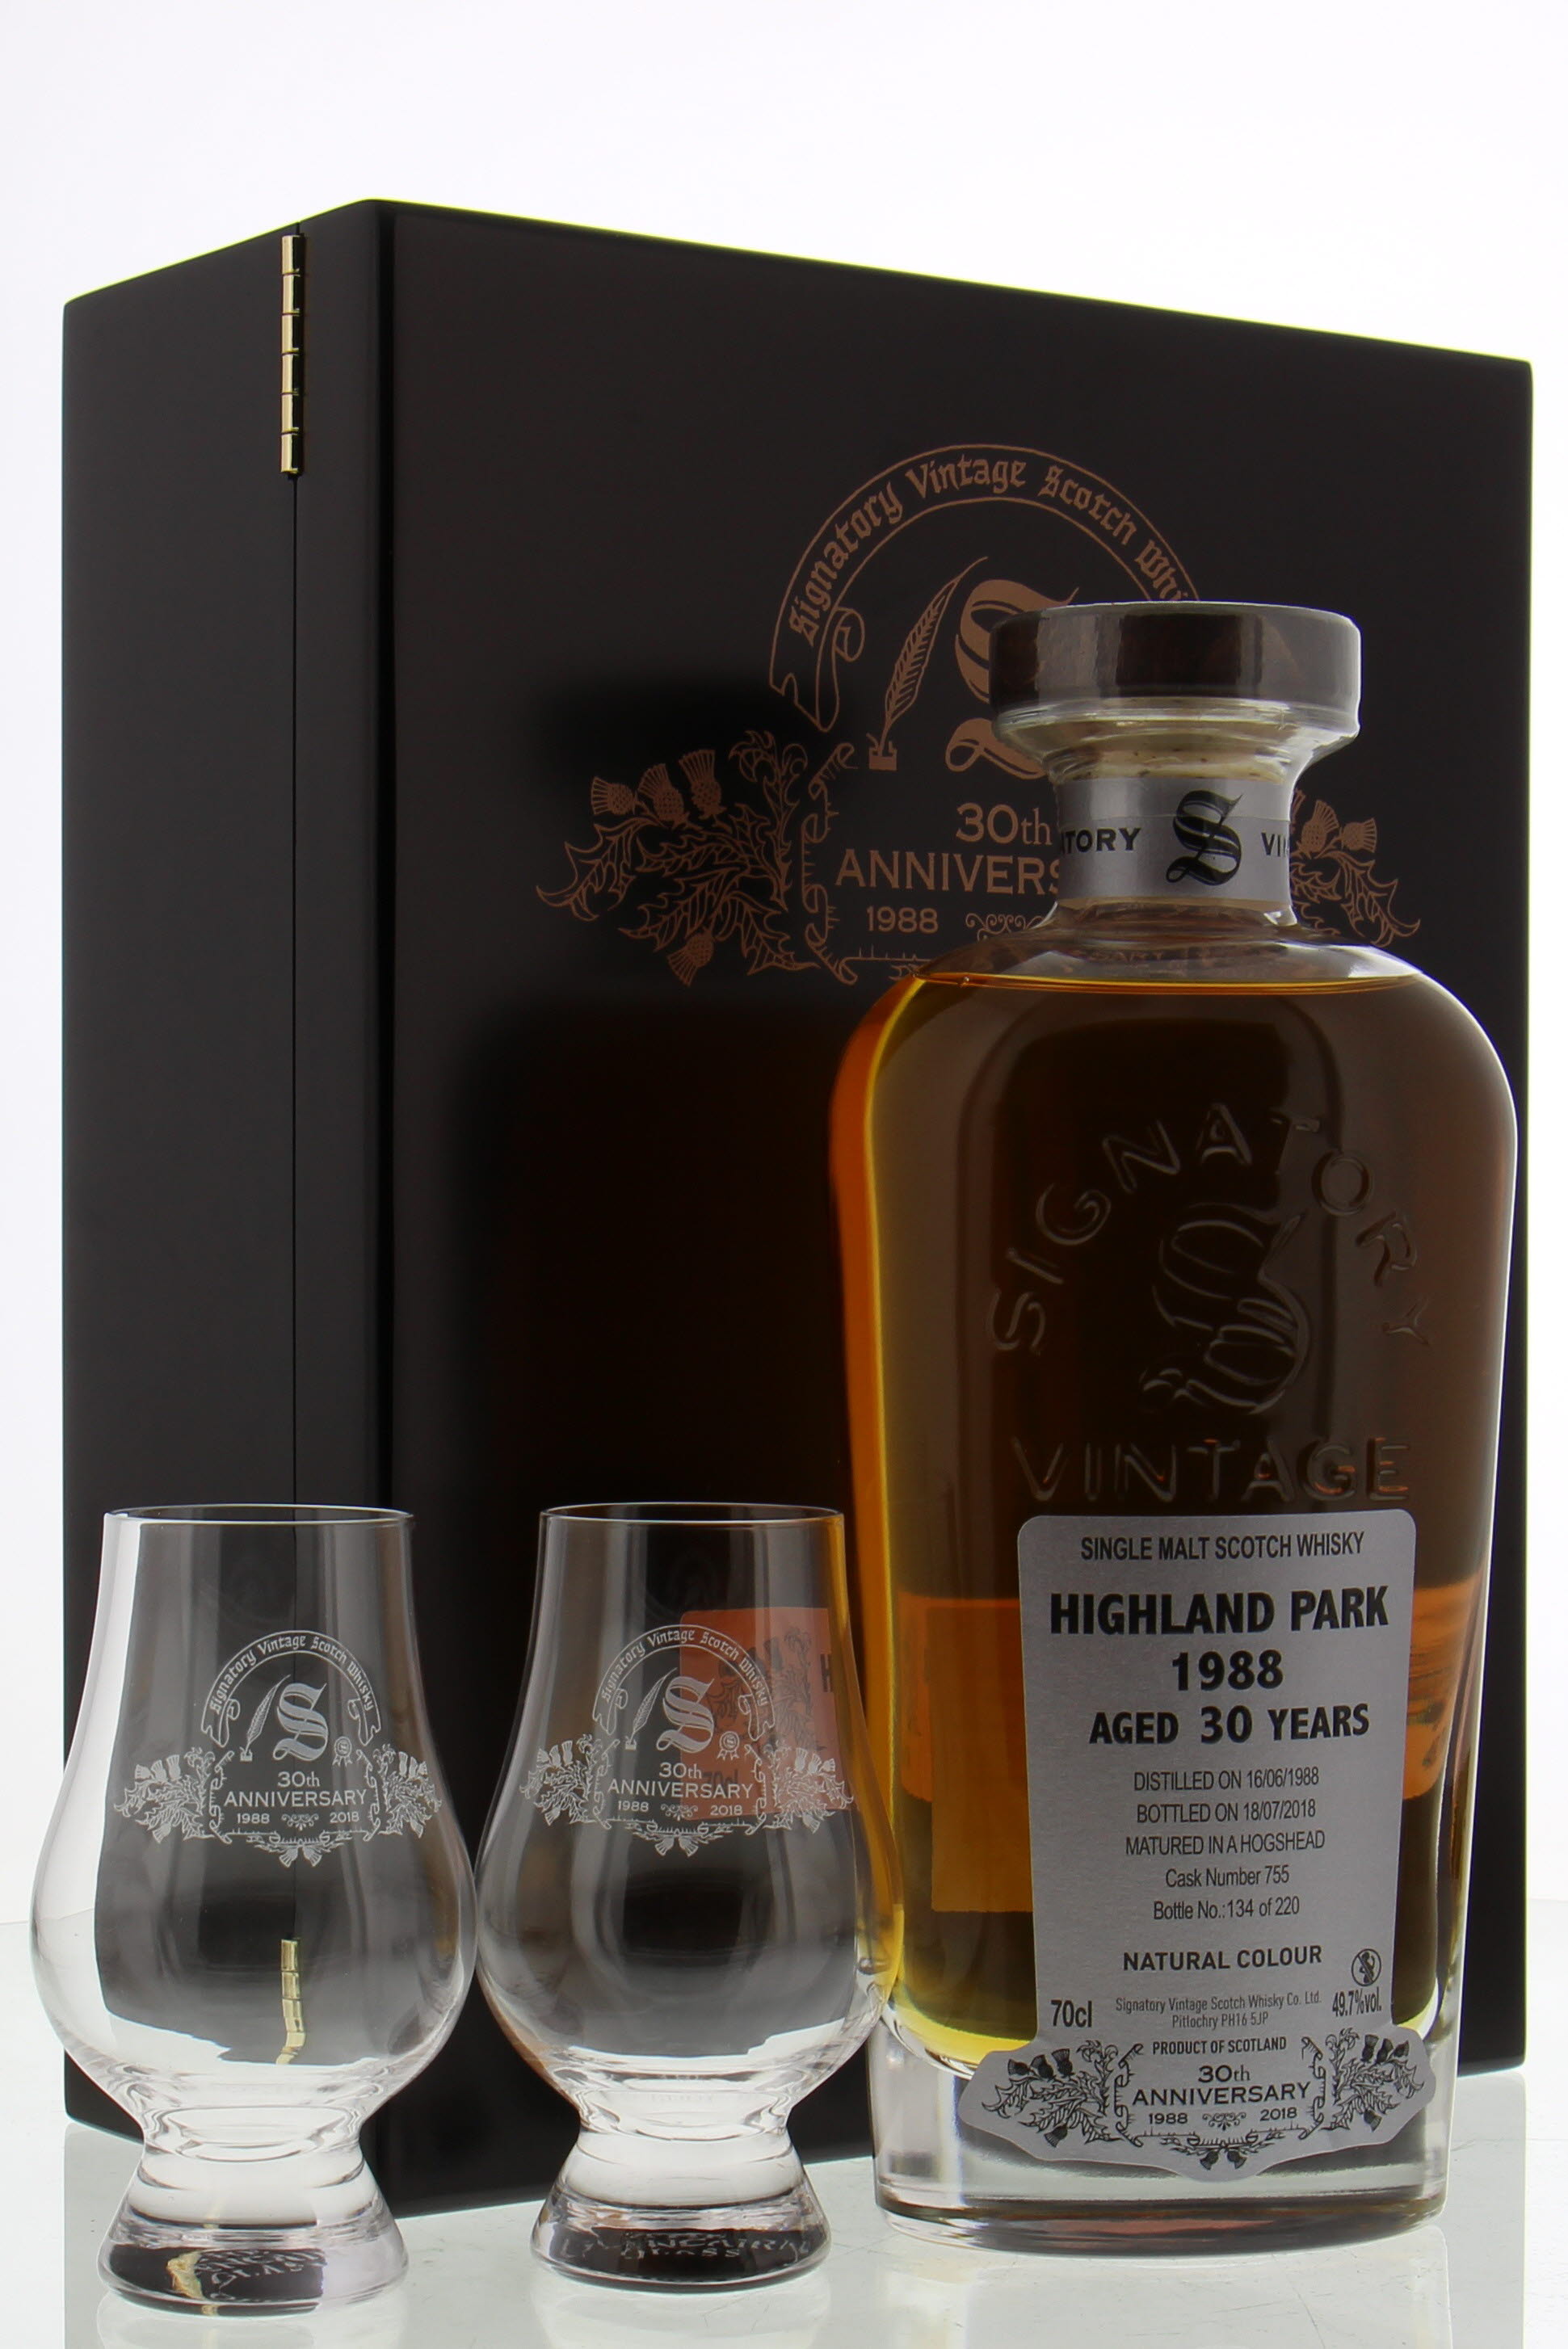 Highland Park - 30 Years Old Signatory 30th Anniversary Cask 755 49.7% 1988 In Original Wooden Container